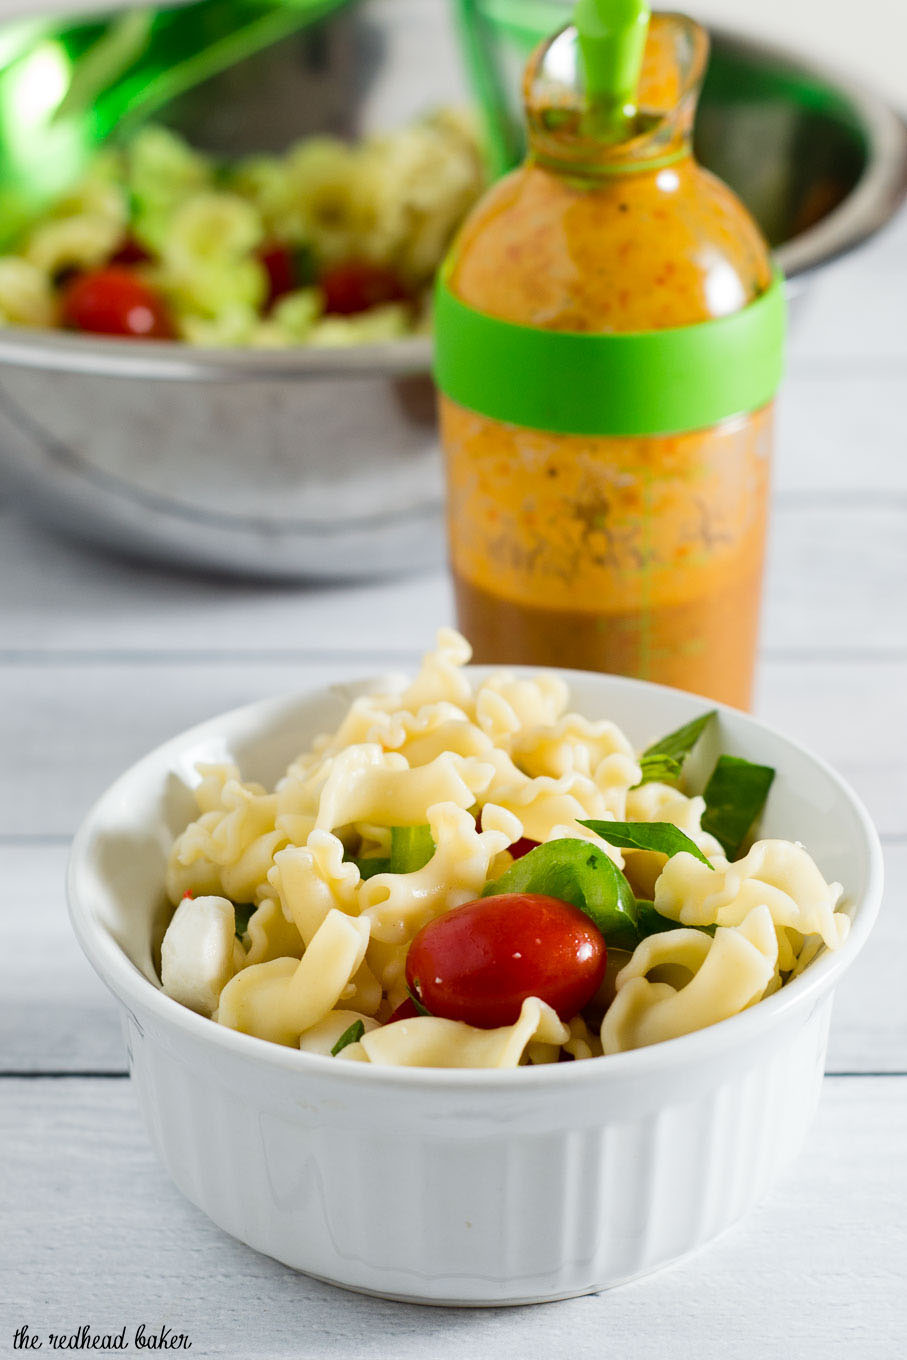 Garden pasta salad combines pasta with fresh garden vegetables, basil, and mozzarella cheese. Serve as a side salad, or add chicken or shrimp to make it a main dish.